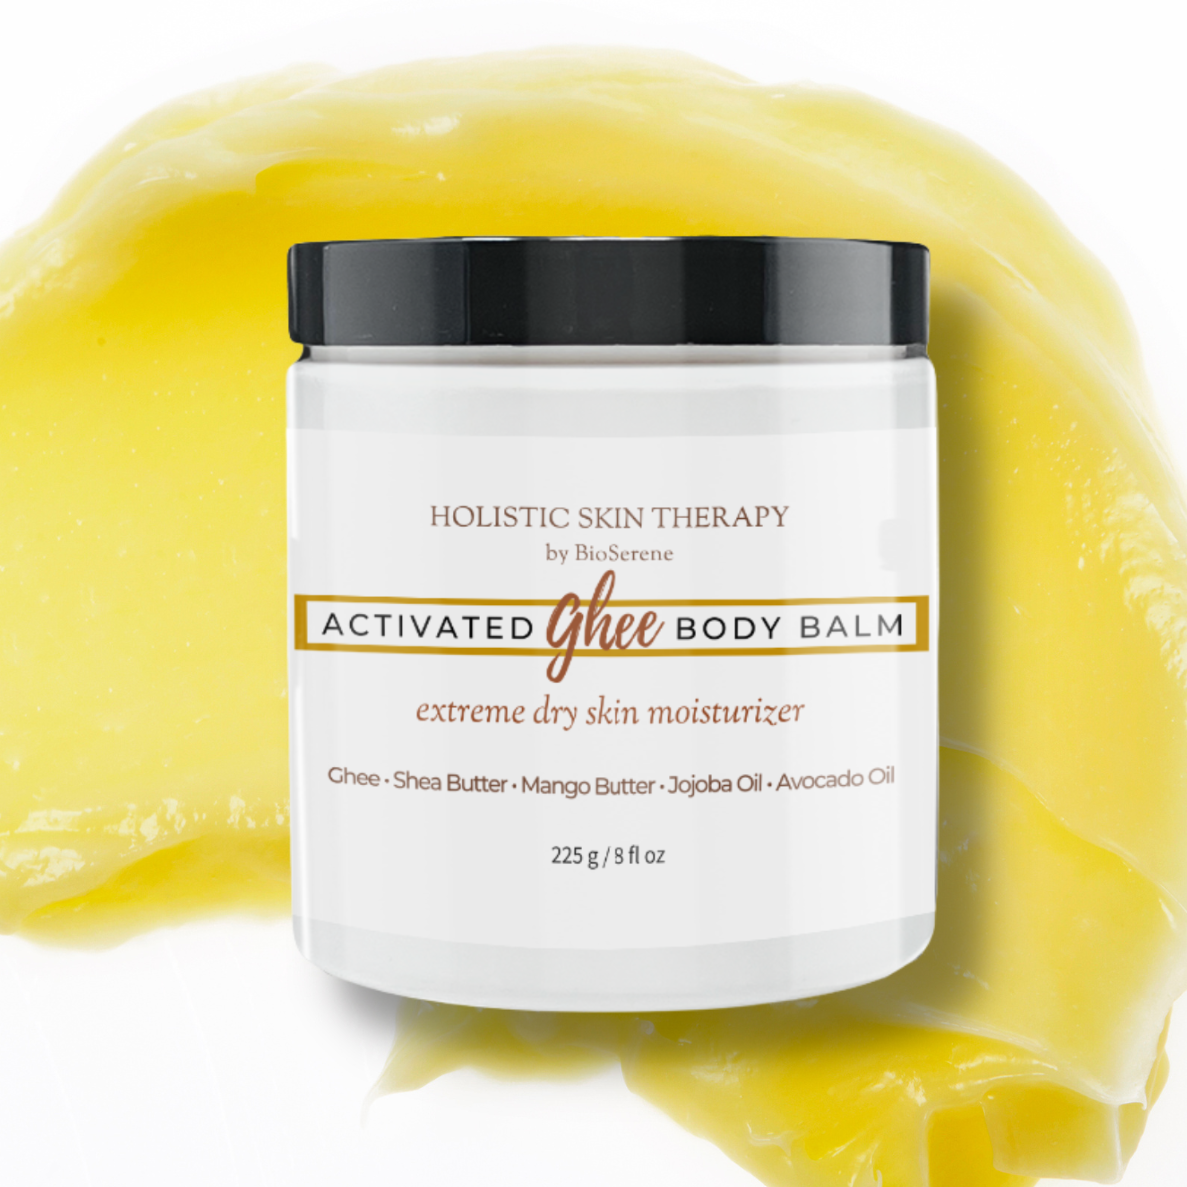 Activated Ghee Body Balm - Holistic Skin Therapy